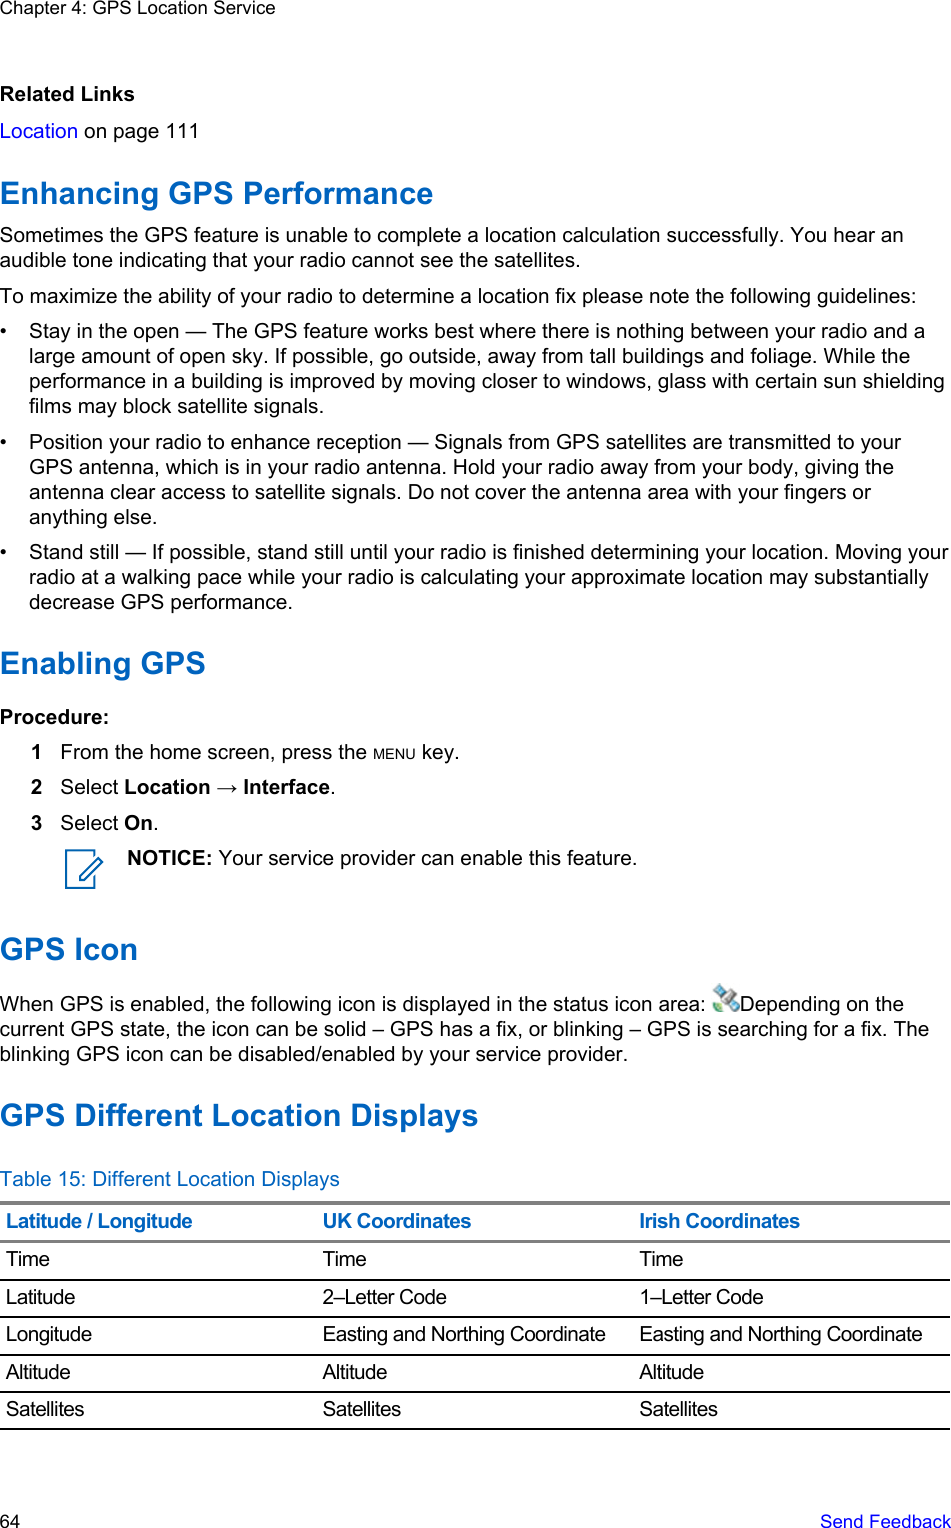 Related LinksLocation on page 111Enhancing GPS PerformanceSometimes the GPS feature is unable to complete a location calculation successfully. You hear anaudible tone indicating that your radio cannot see the satellites.To maximize the ability of your radio to determine a location fix please note the following guidelines:• Stay in the open — The GPS feature works best where there is nothing between your radio and alarge amount of open sky. If possible, go outside, away from tall buildings and foliage. While theperformance in a building is improved by moving closer to windows, glass with certain sun shieldingfilms may block satellite signals.• Position your radio to enhance reception — Signals from GPS satellites are transmitted to yourGPS antenna, which is in your radio antenna. Hold your radio away from your body, giving theantenna clear access to satellite signals. Do not cover the antenna area with your fingers oranything else.• Stand still — If possible, stand still until your radio is finished determining your location. Moving yourradio at a walking pace while your radio is calculating your approximate location may substantiallydecrease GPS performance.Enabling GPSProcedure:1From the home screen, press the MENU key.2Select Location → Interface.3Select On.NOTICE: Your service provider can enable this feature.GPS IconWhen GPS is enabled, the following icon is displayed in the status icon area:  Depending on thecurrent GPS state, the icon can be solid – GPS has a fix, or blinking – GPS is searching for a fix. Theblinking GPS icon can be disabled/enabled by your service provider.GPS Different Location DisplaysTable 15: Different Location DisplaysLatitude / Longitude UK Coordinates Irish CoordinatesTime Time TimeLatitude 2–Letter Code 1–Letter CodeLongitude Easting and Northing Coordinate Easting and Northing CoordinateAltitude Altitude AltitudeSatellites Satellites SatellitesChapter 4: GPS Location Service64   Send Feedback